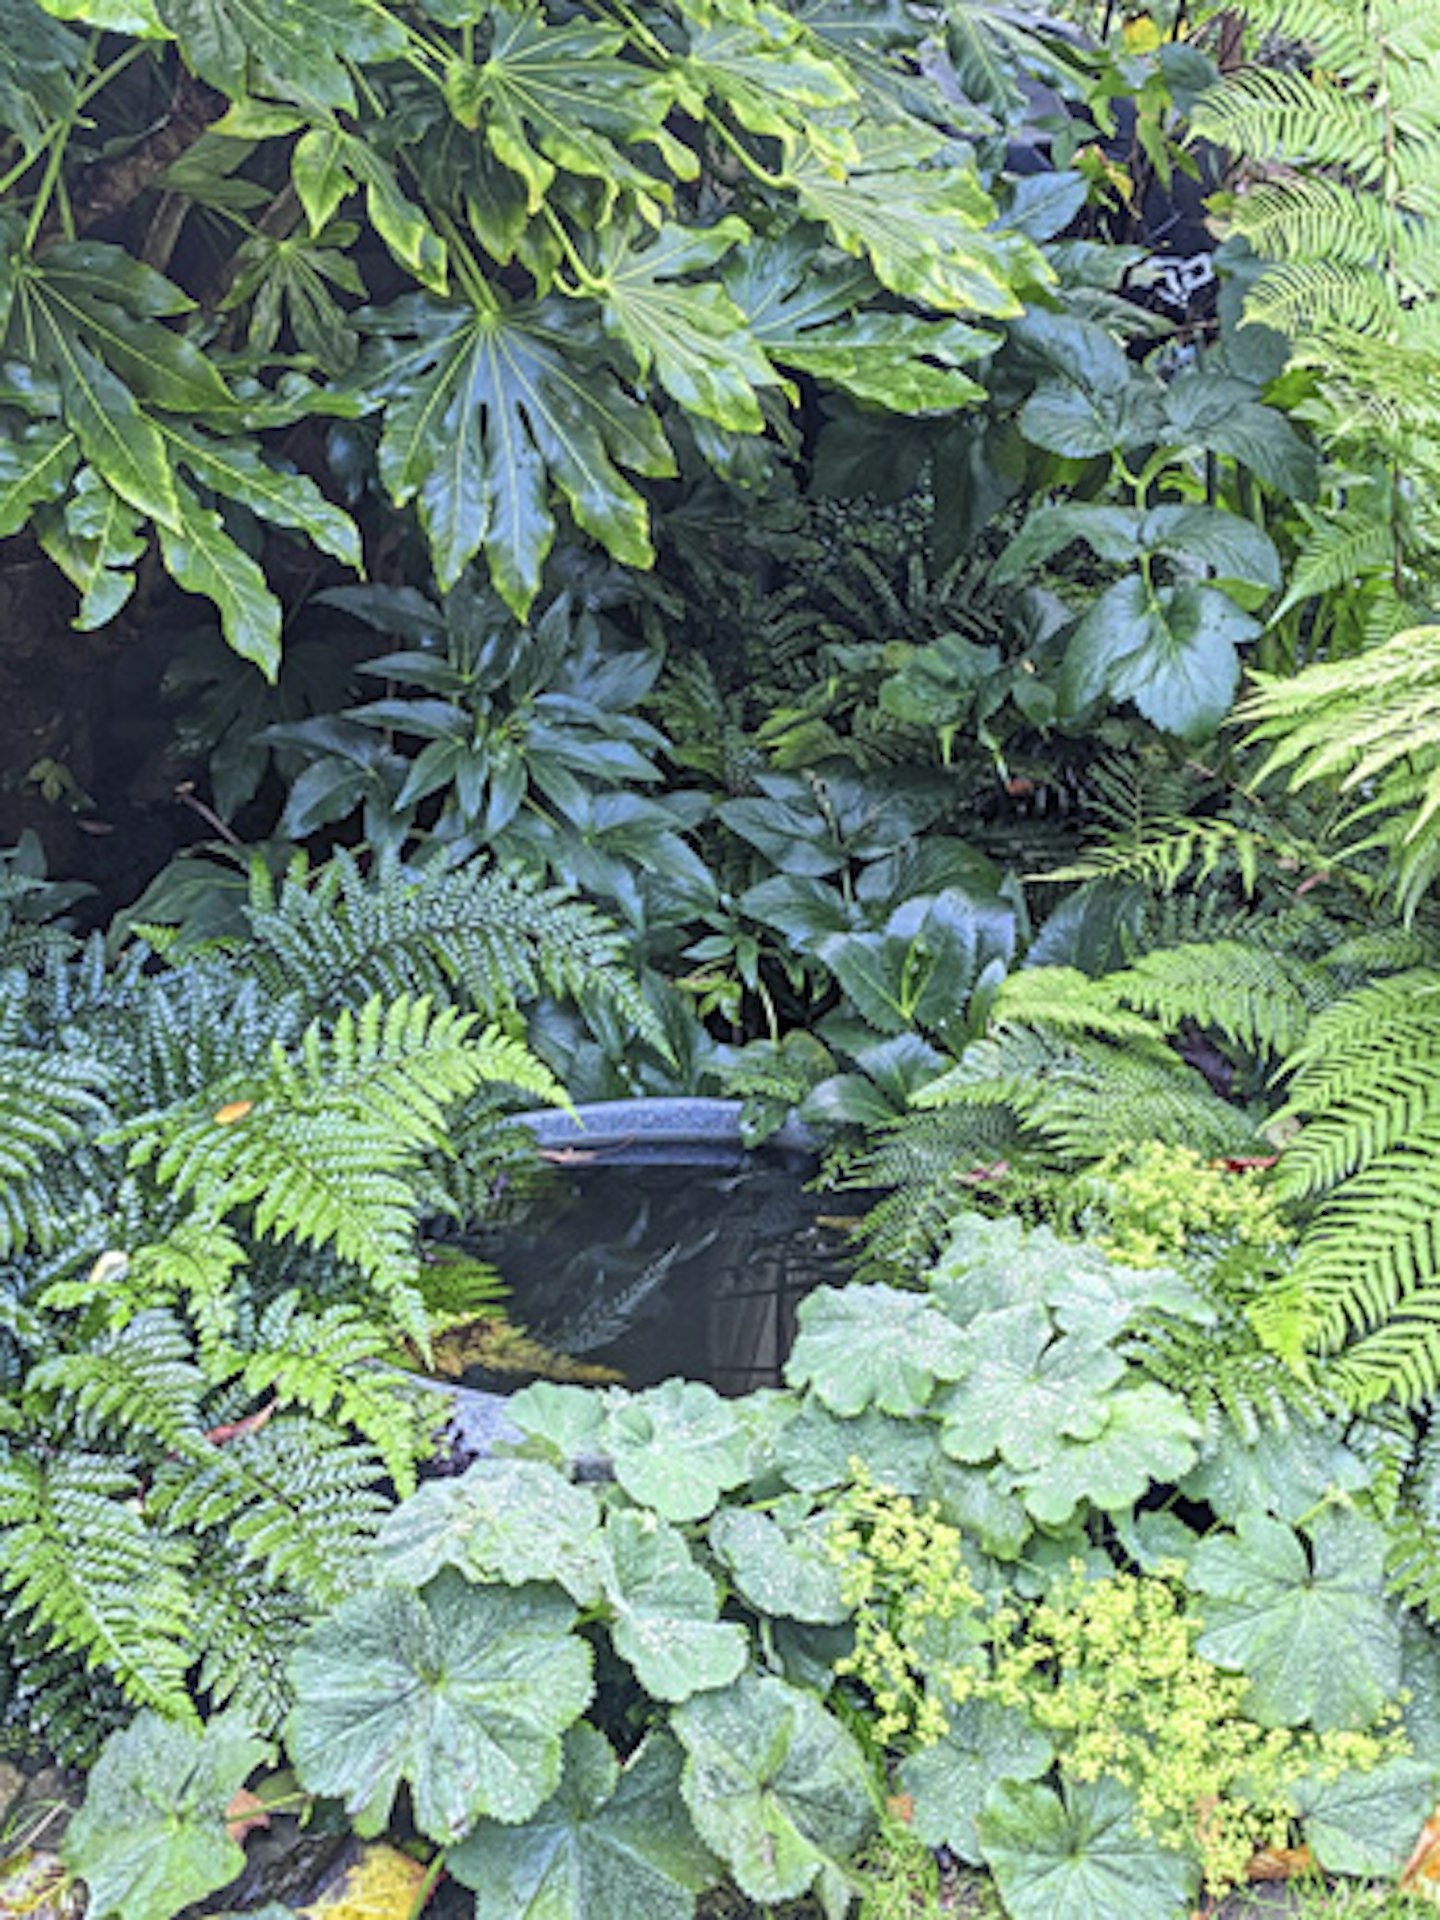 A shady corner shines with light-reflecting glossy evergreen leaves and a micropond